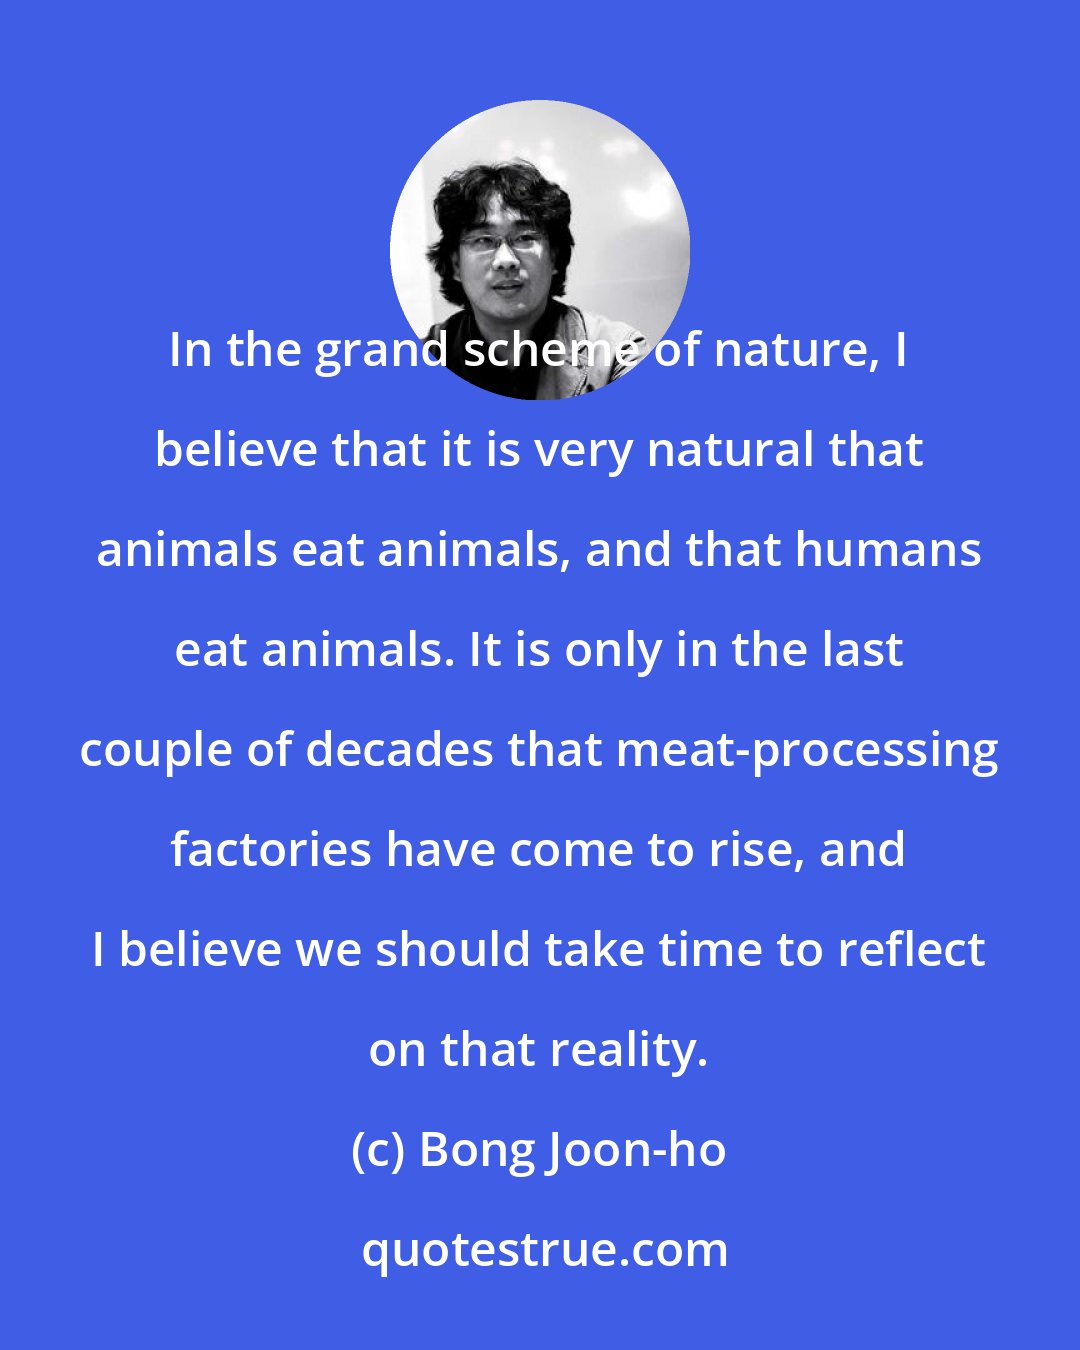 Bong Joon-ho: In the grand scheme of nature, I believe that it is very natural that animals eat animals, and that humans eat animals. It is only in the last couple of decades that meat-processing factories have come to rise, and I believe we should take time to reflect on that reality.